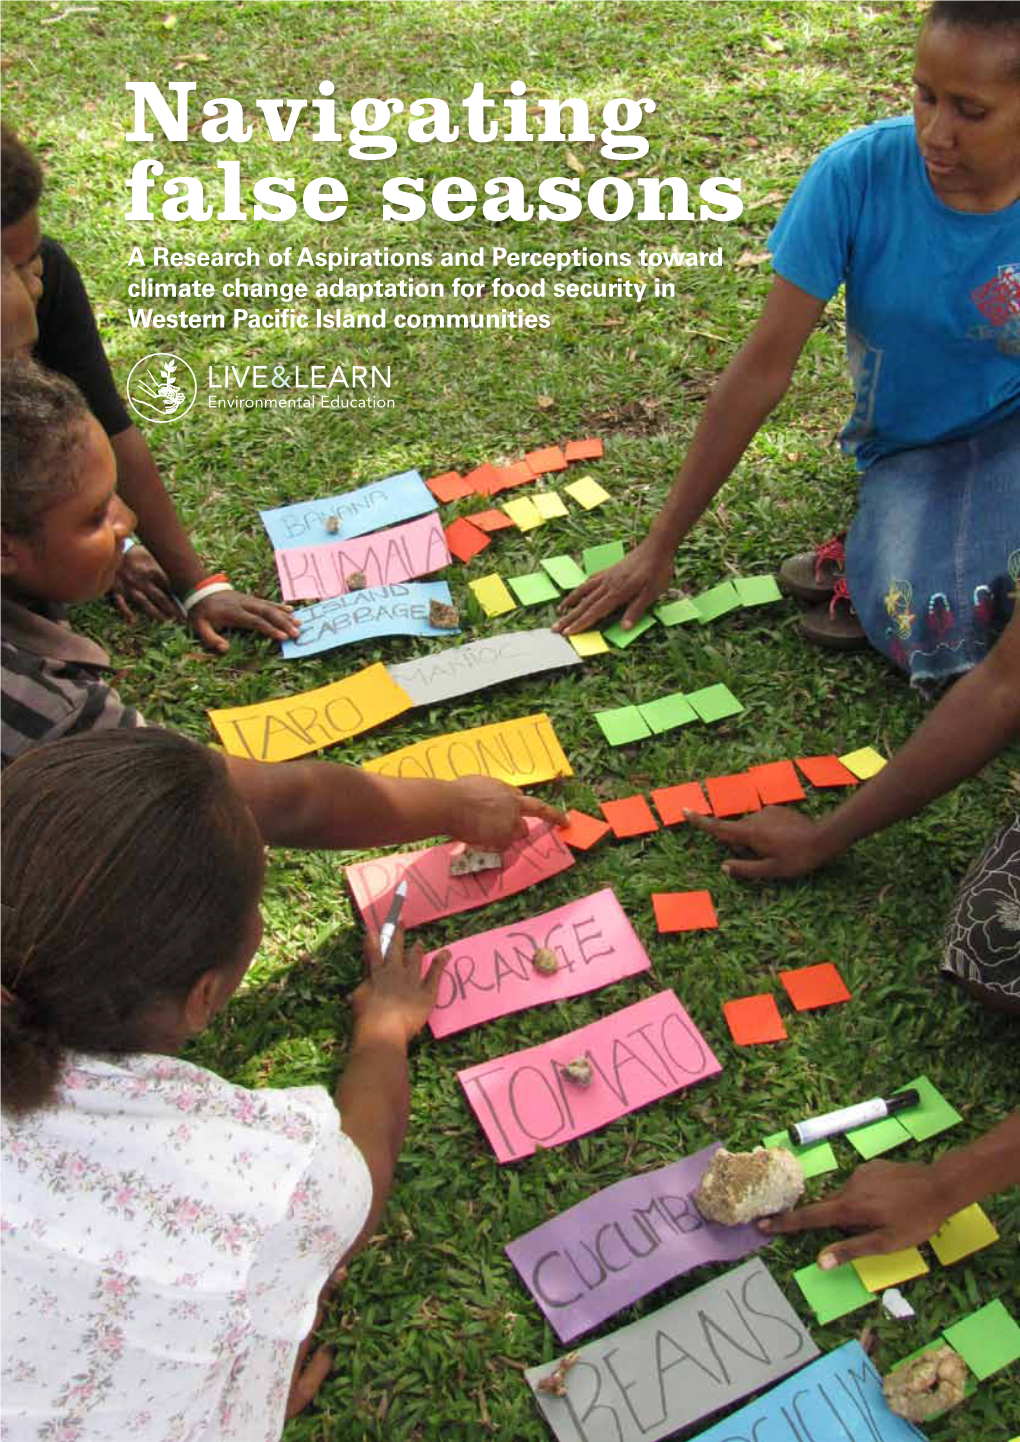 Navigating False Seasons a Research of Aspirations and Perceptions Toward Climate Change Adaptation for Food Security in Western Pacific Island Communities